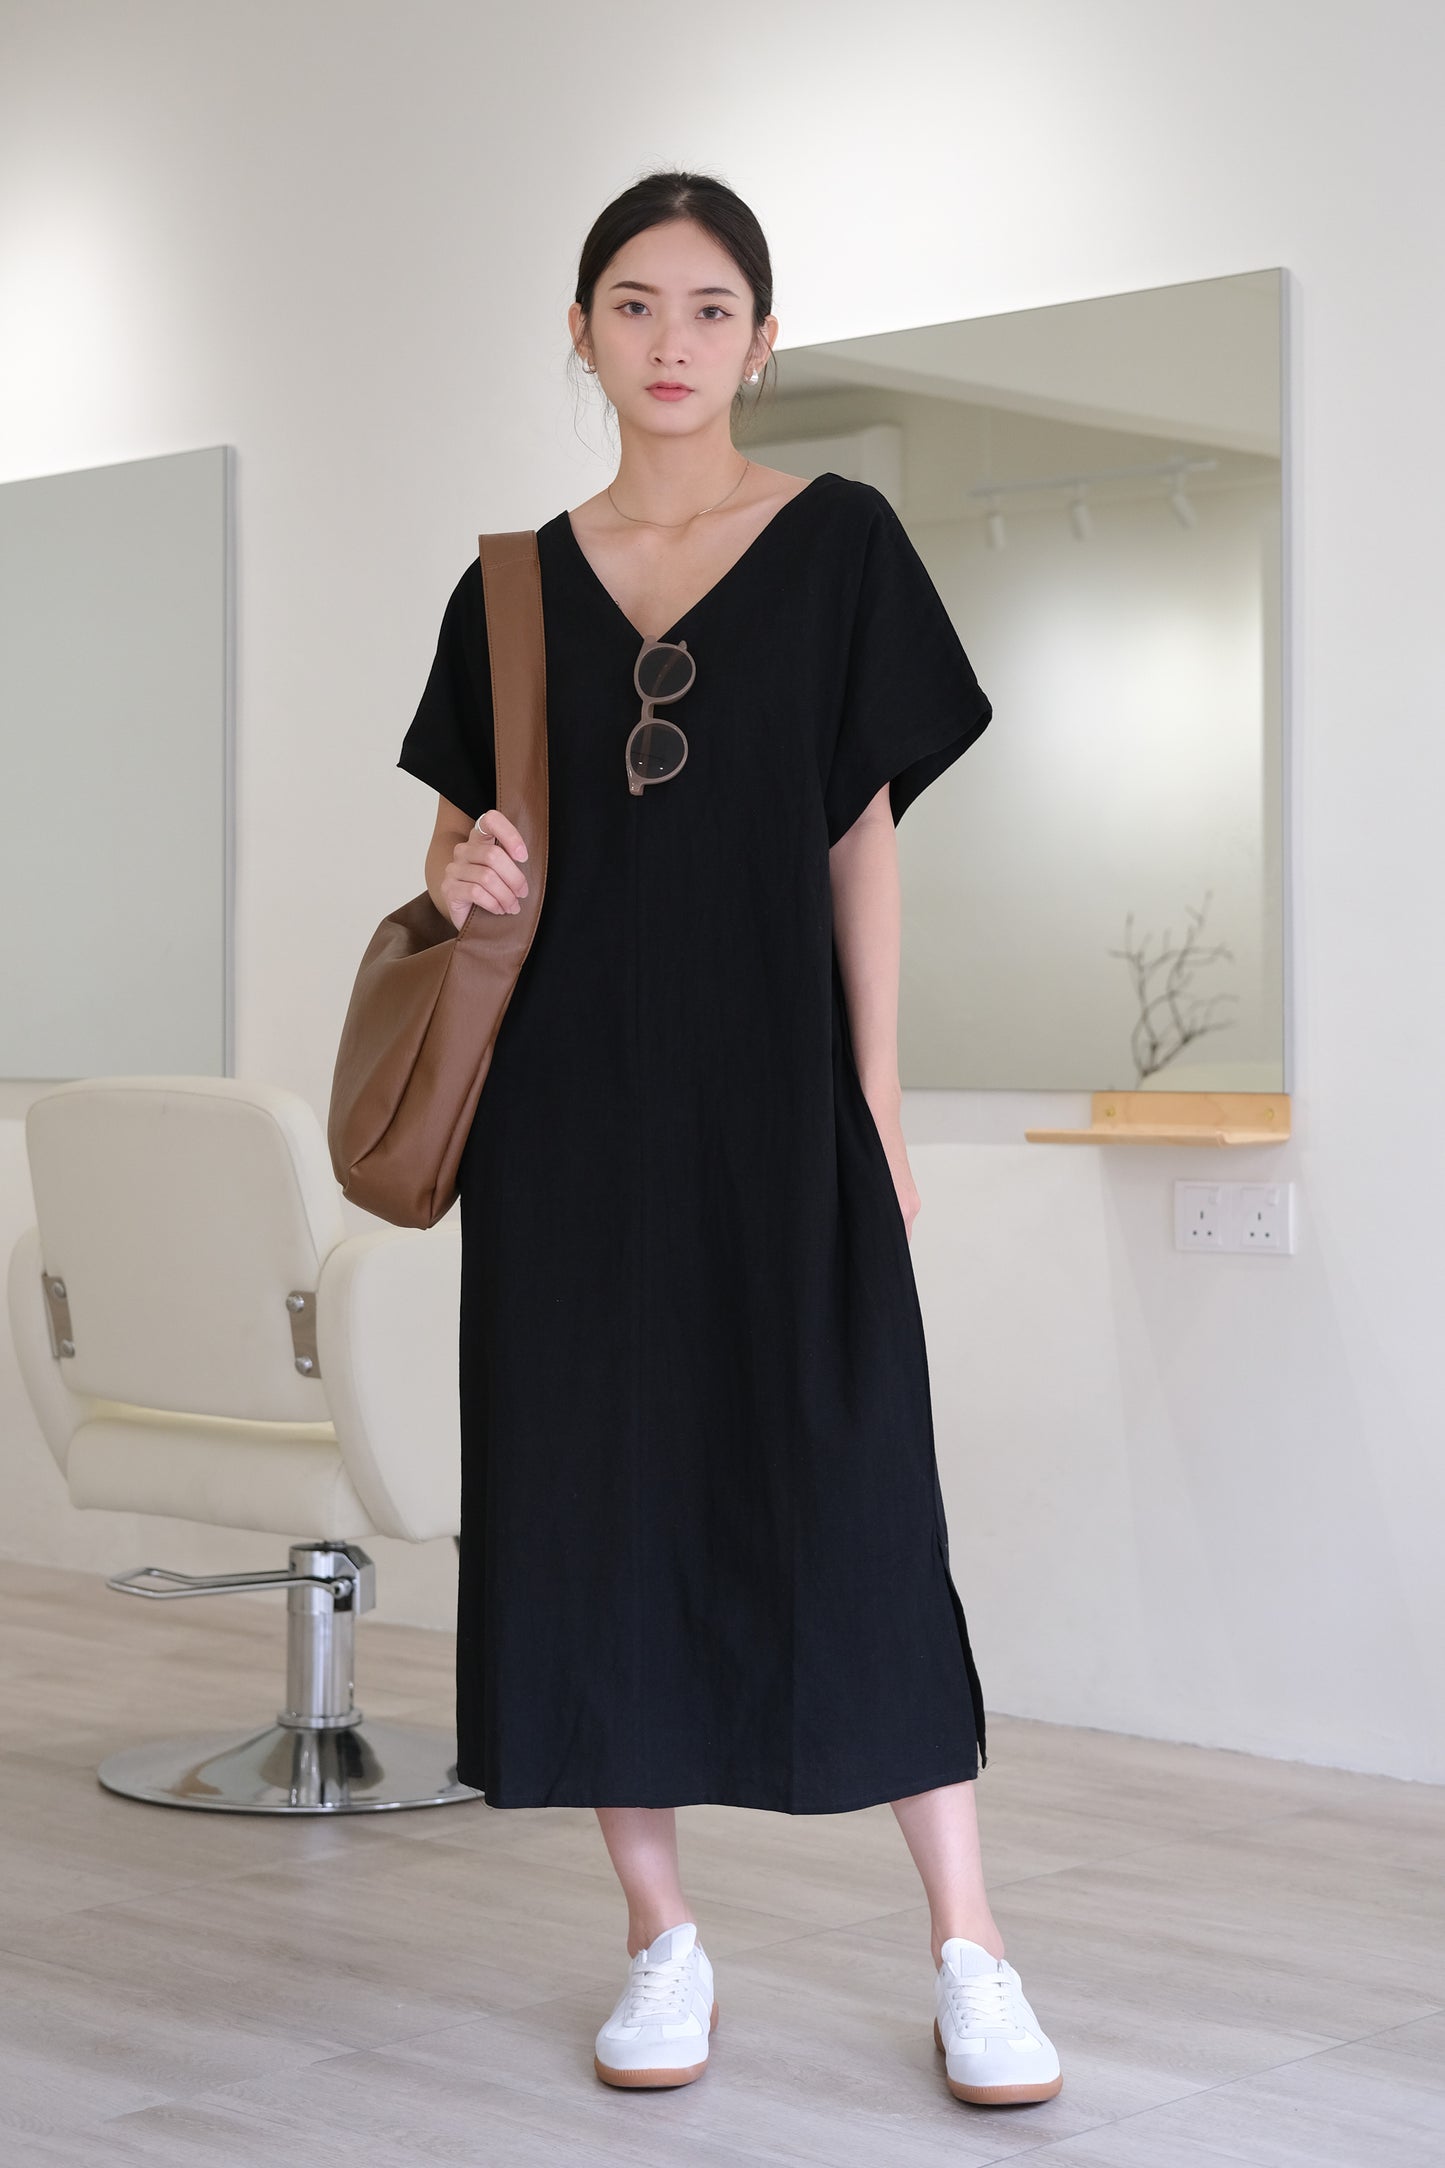 Long, loose short-sleeved dress in classic black